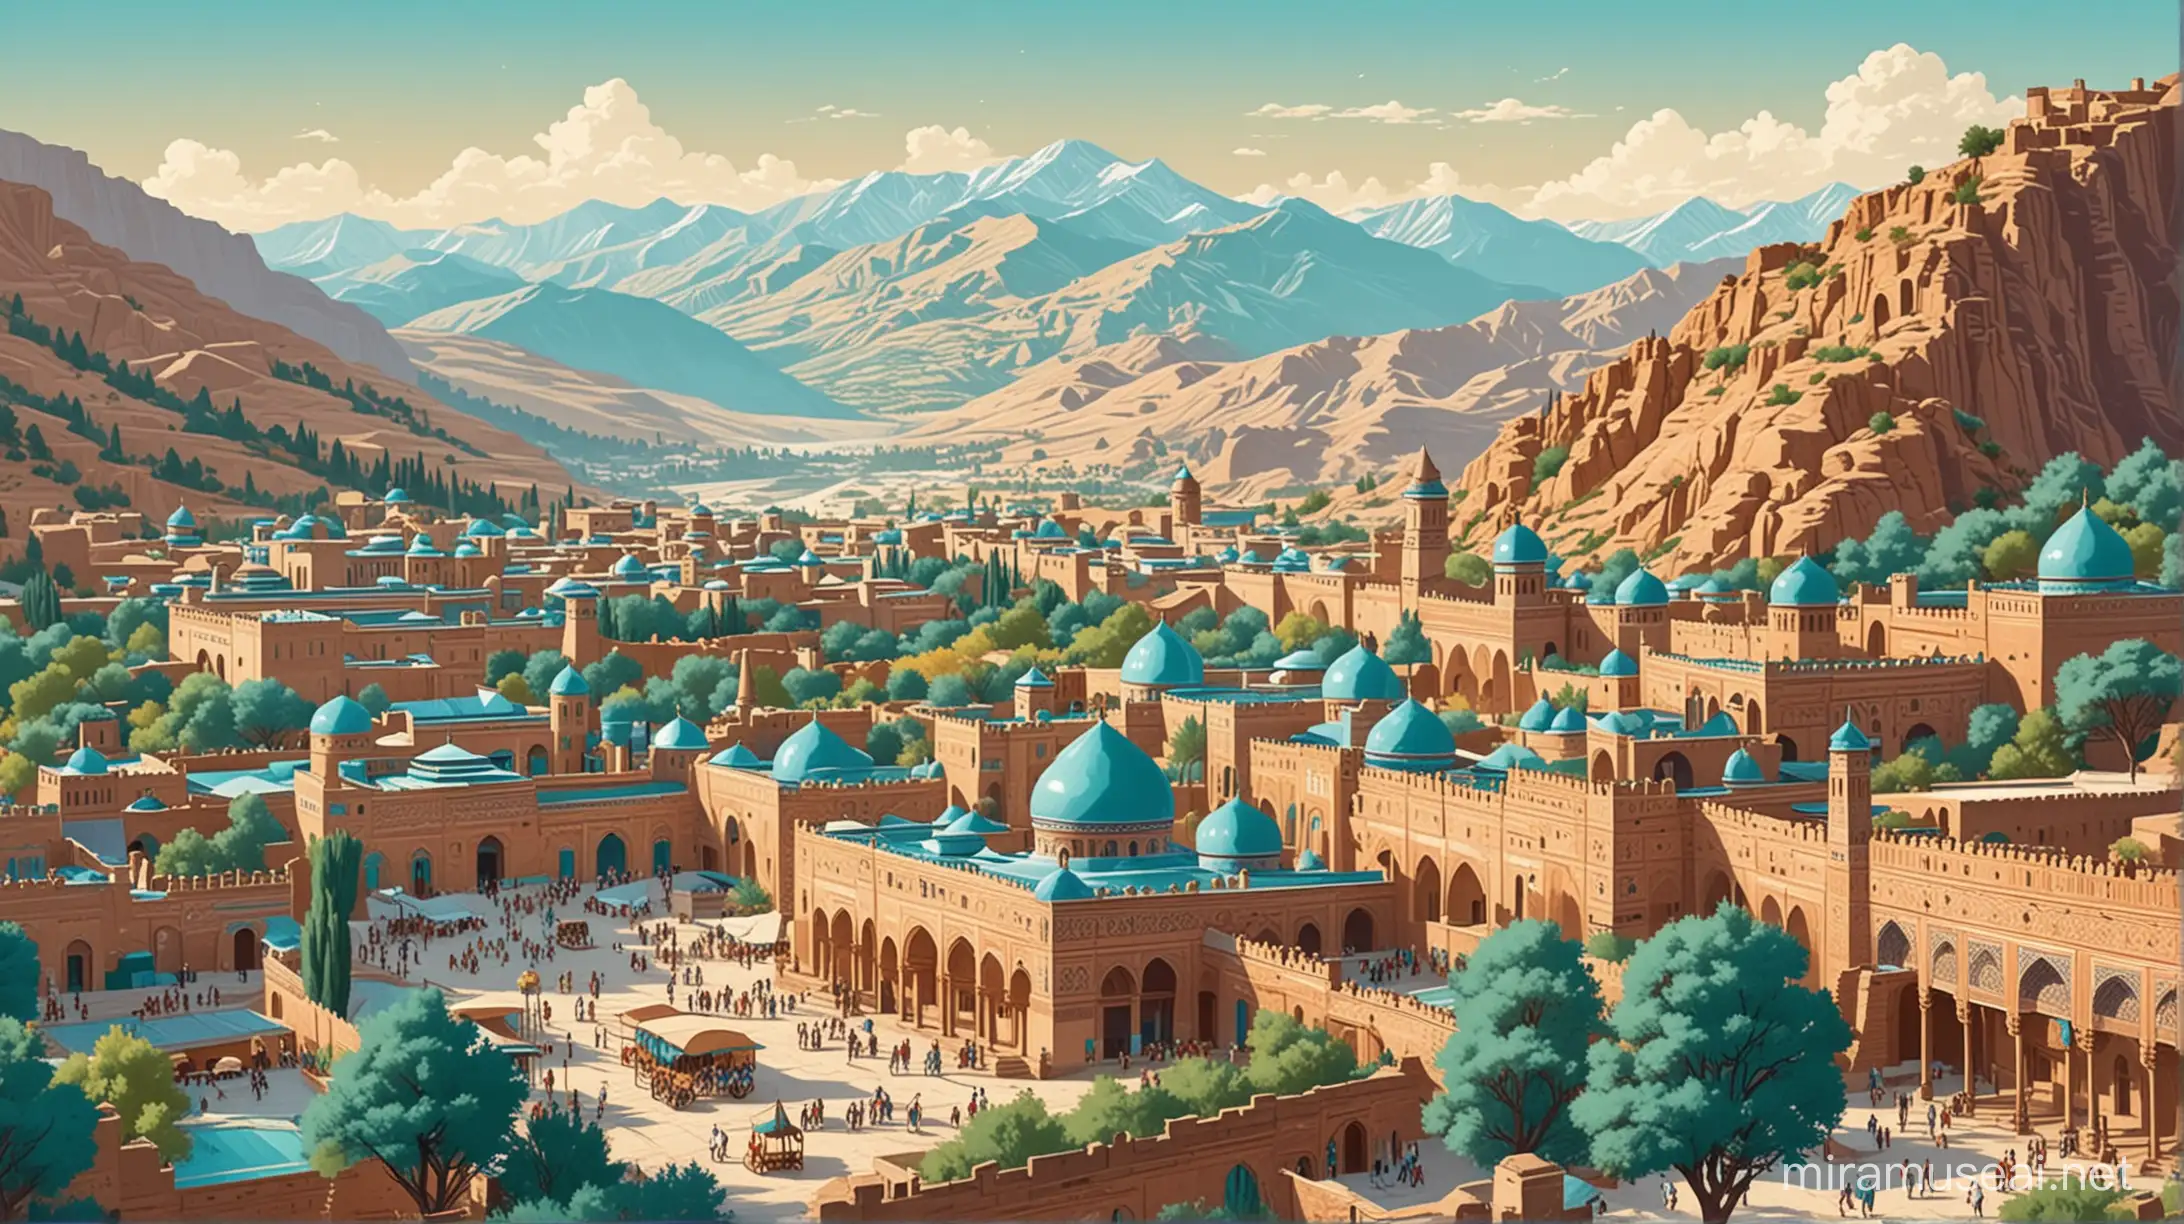 Ancient Samarkand Turquoise Palace and Persian Dwellings